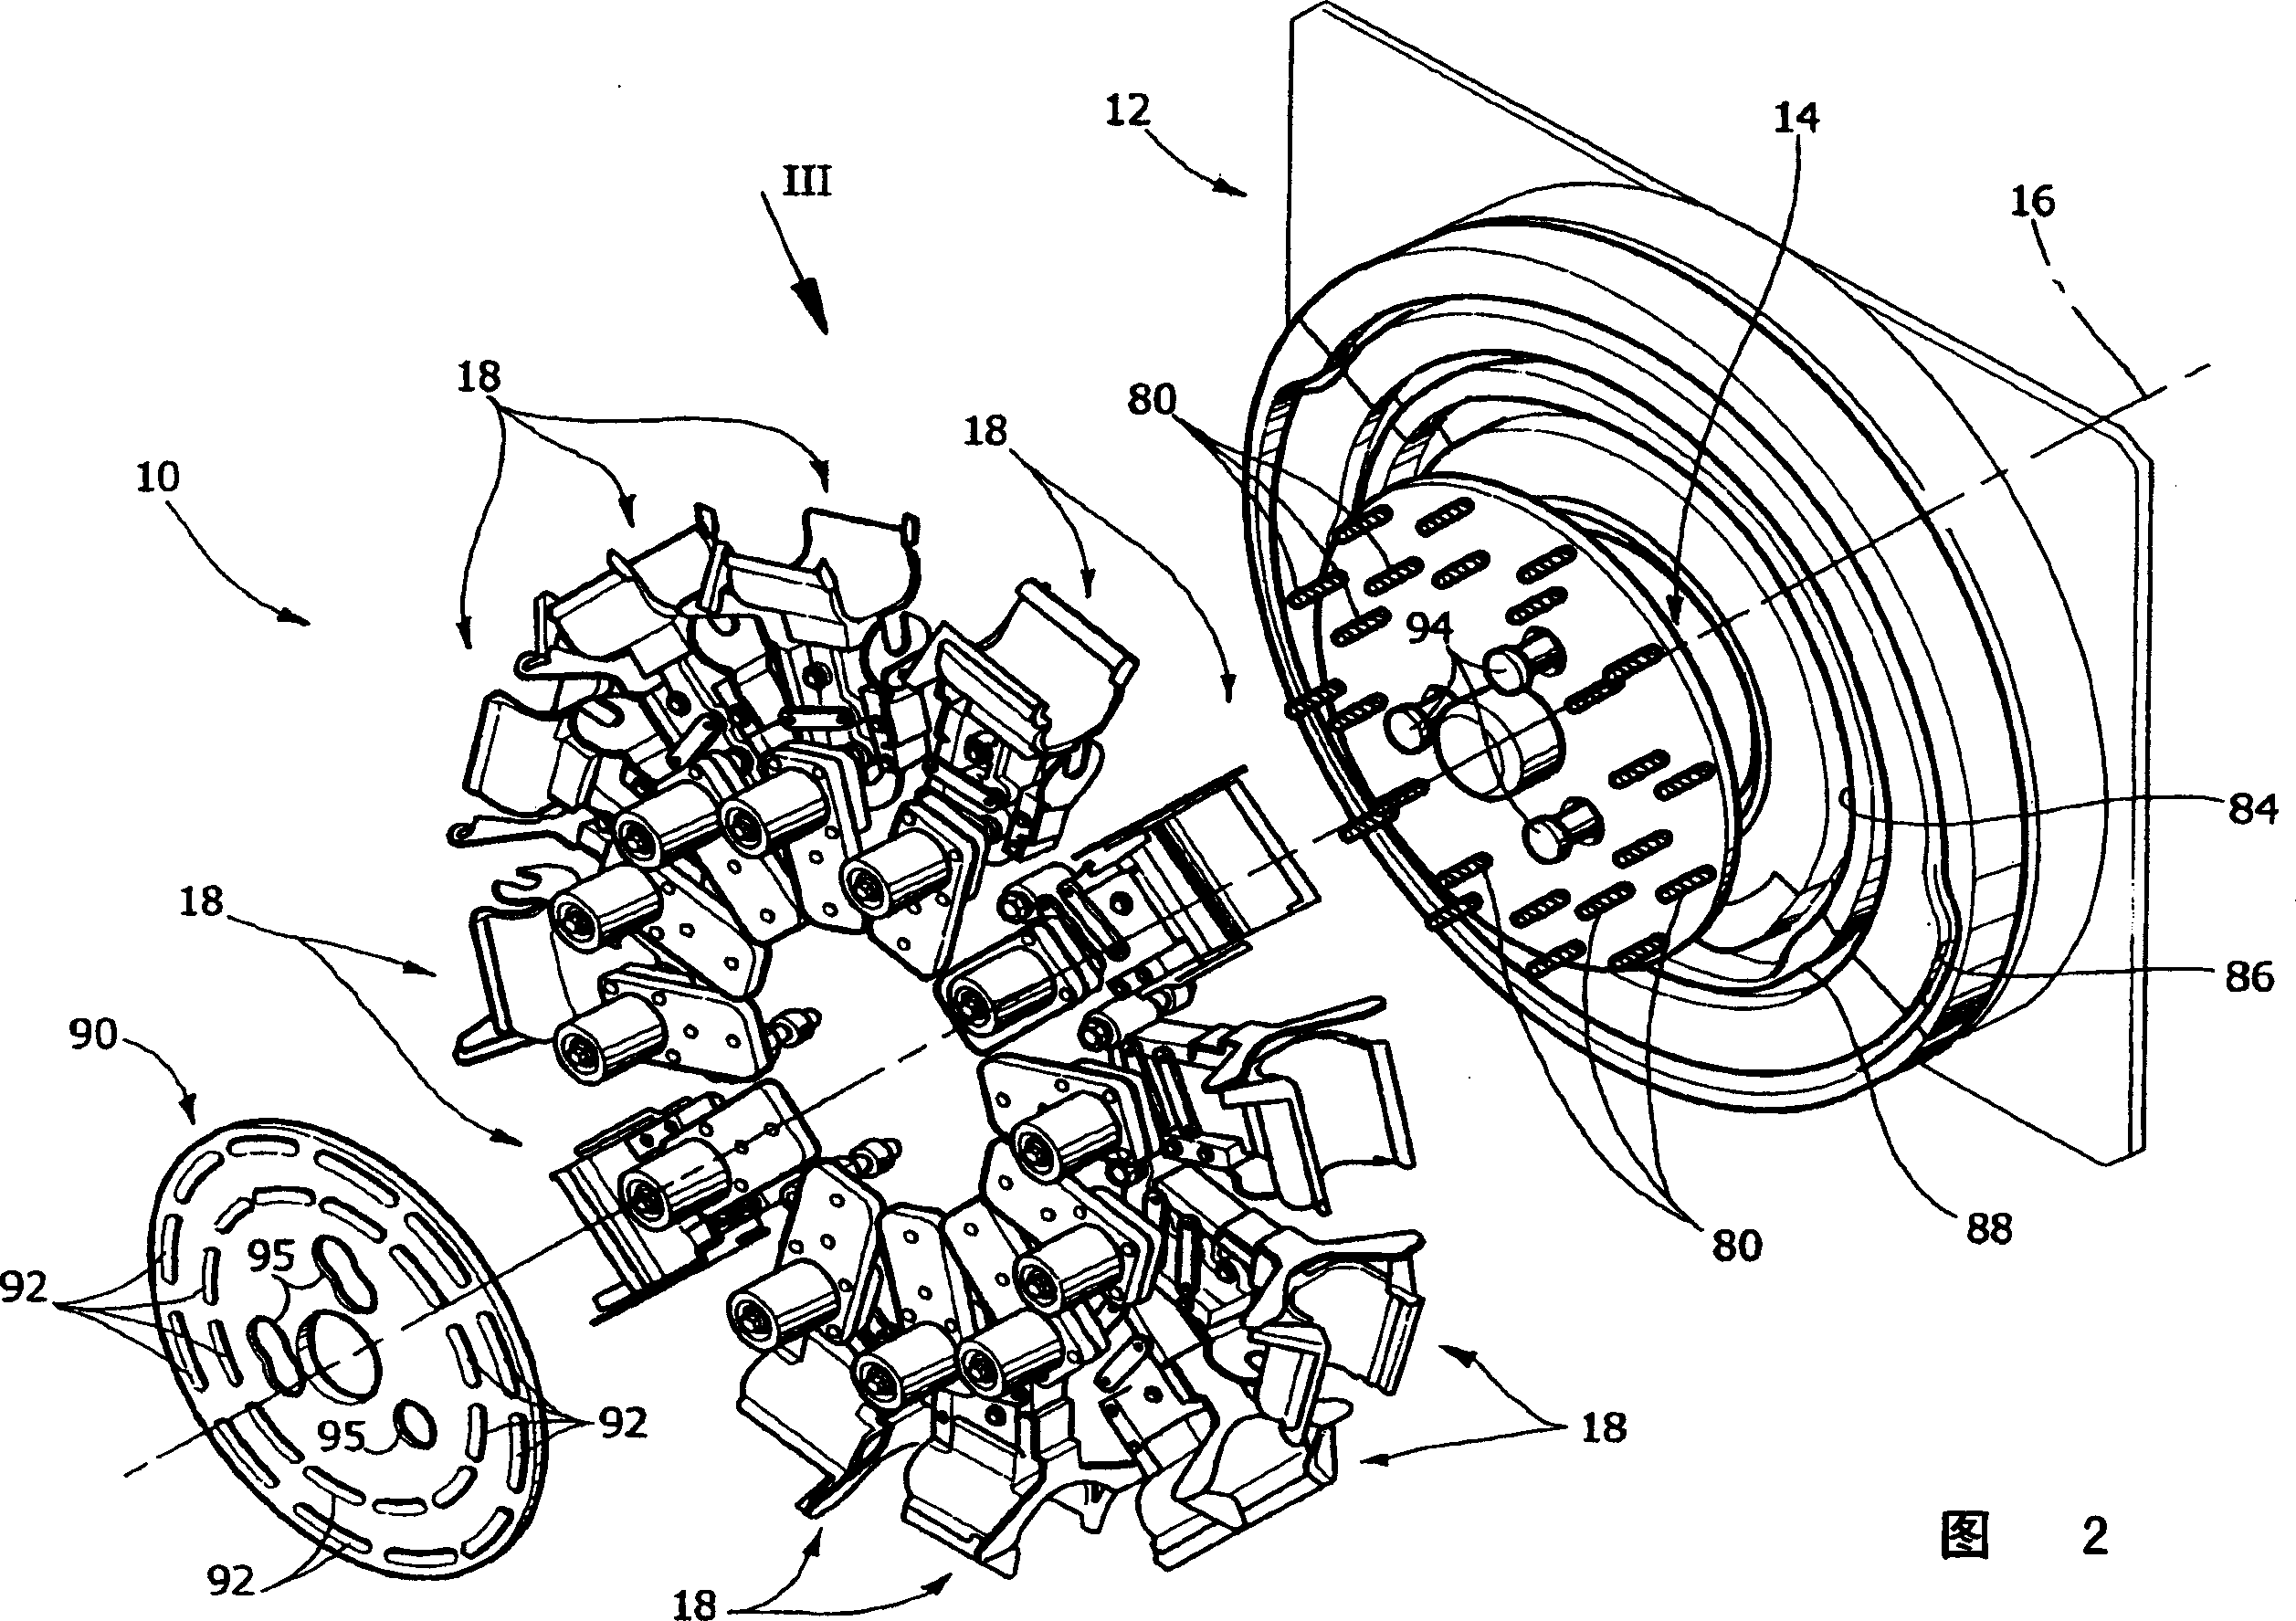 Device for forming groups of products, for instance for automatic packaging machinery